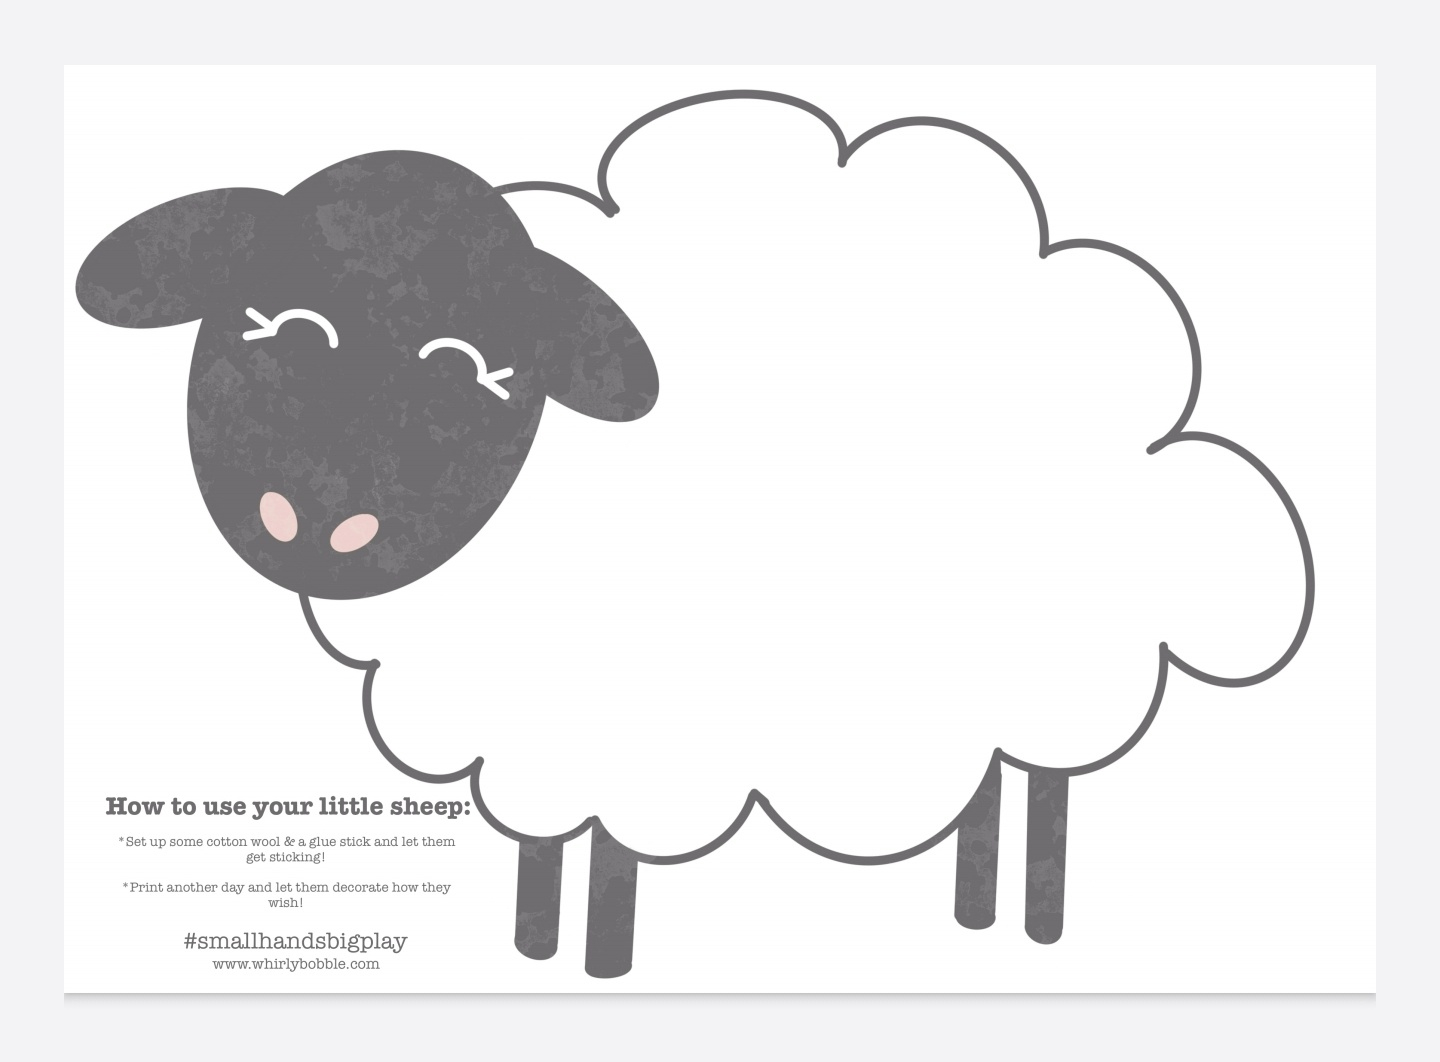 Sheep Sticking Activity - Free Printable — Whirlybobble intended for Free Printable Pictures of Sheep